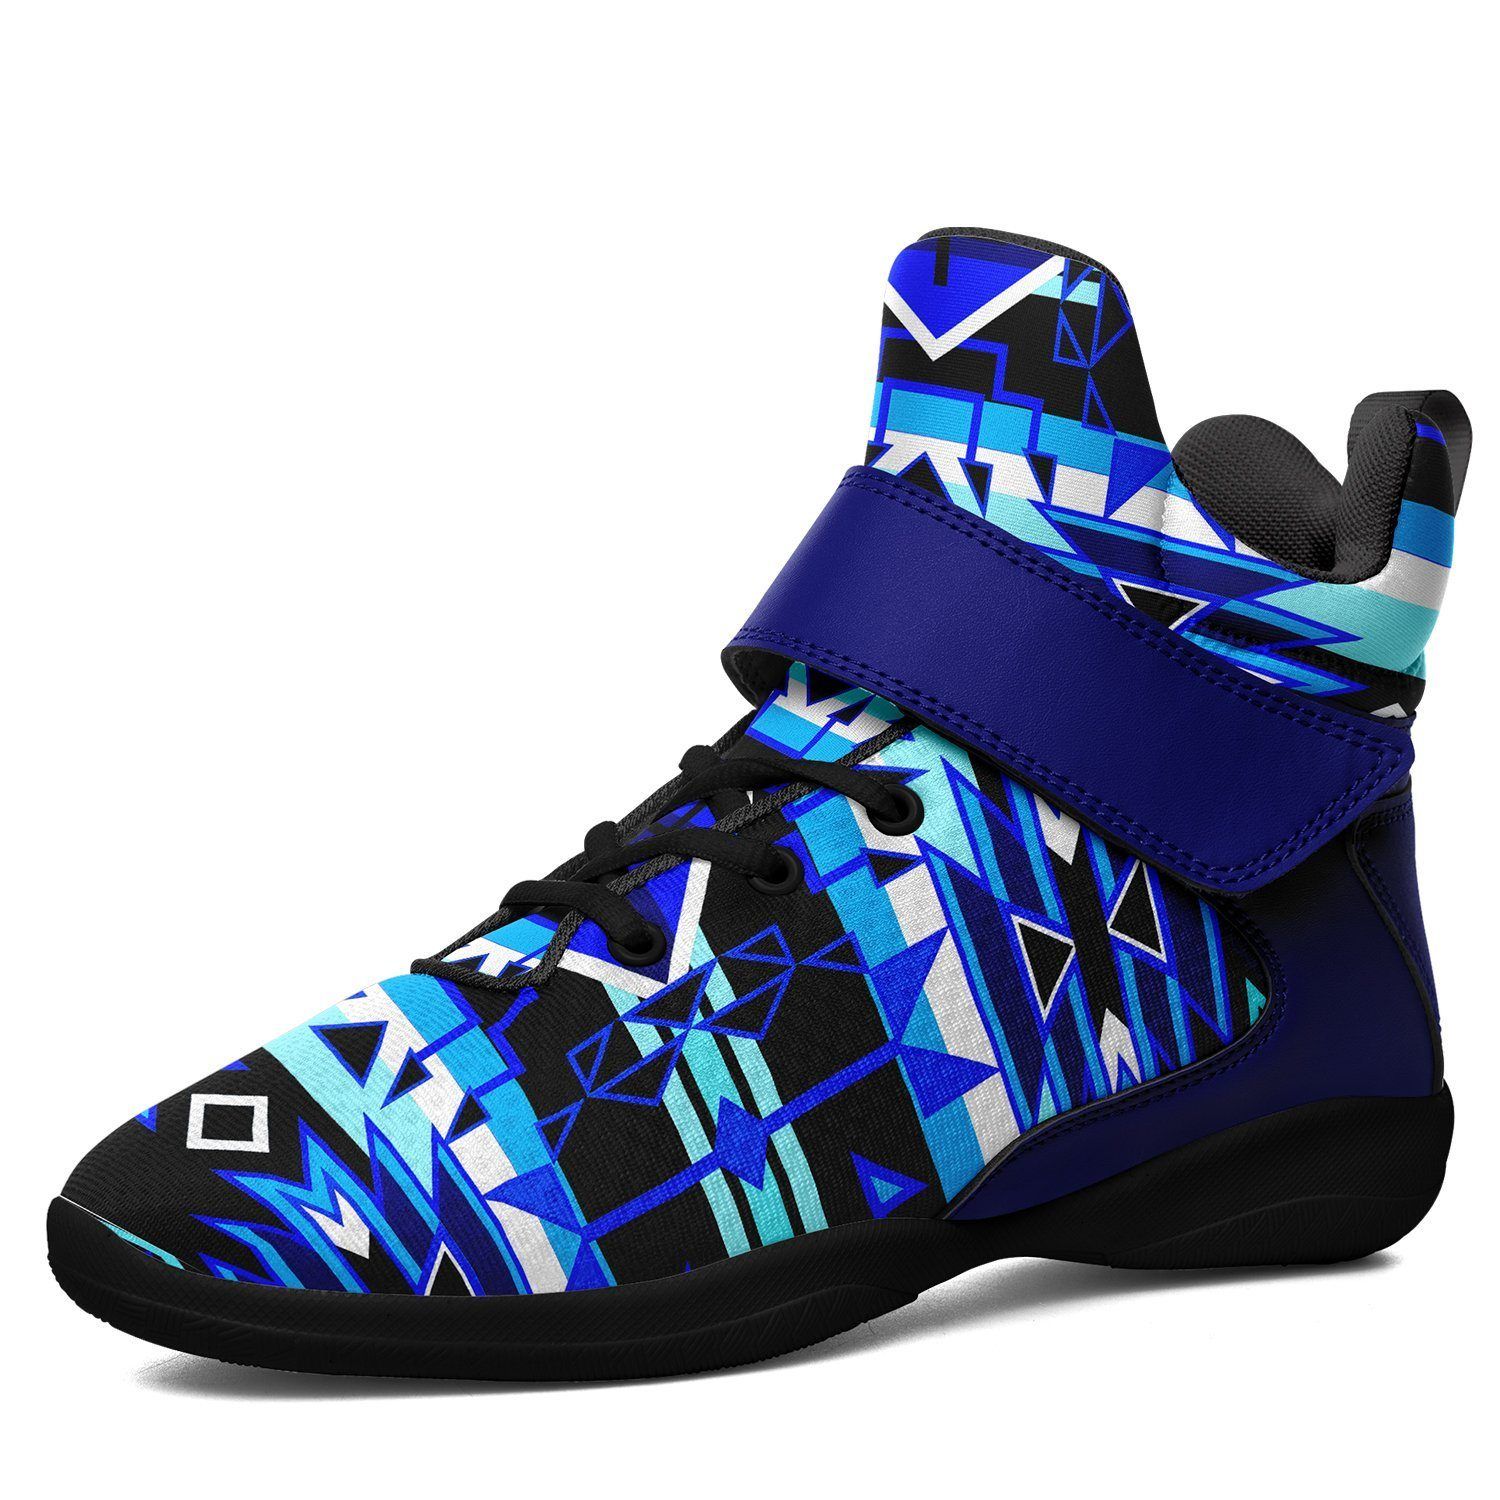 Force of Nature Winter Night Ipottaa Basketball / Sport High Top Shoes - Black Sole 49 Dzine US Men 7 / EUR 40 Black Sole with Blue Strap 